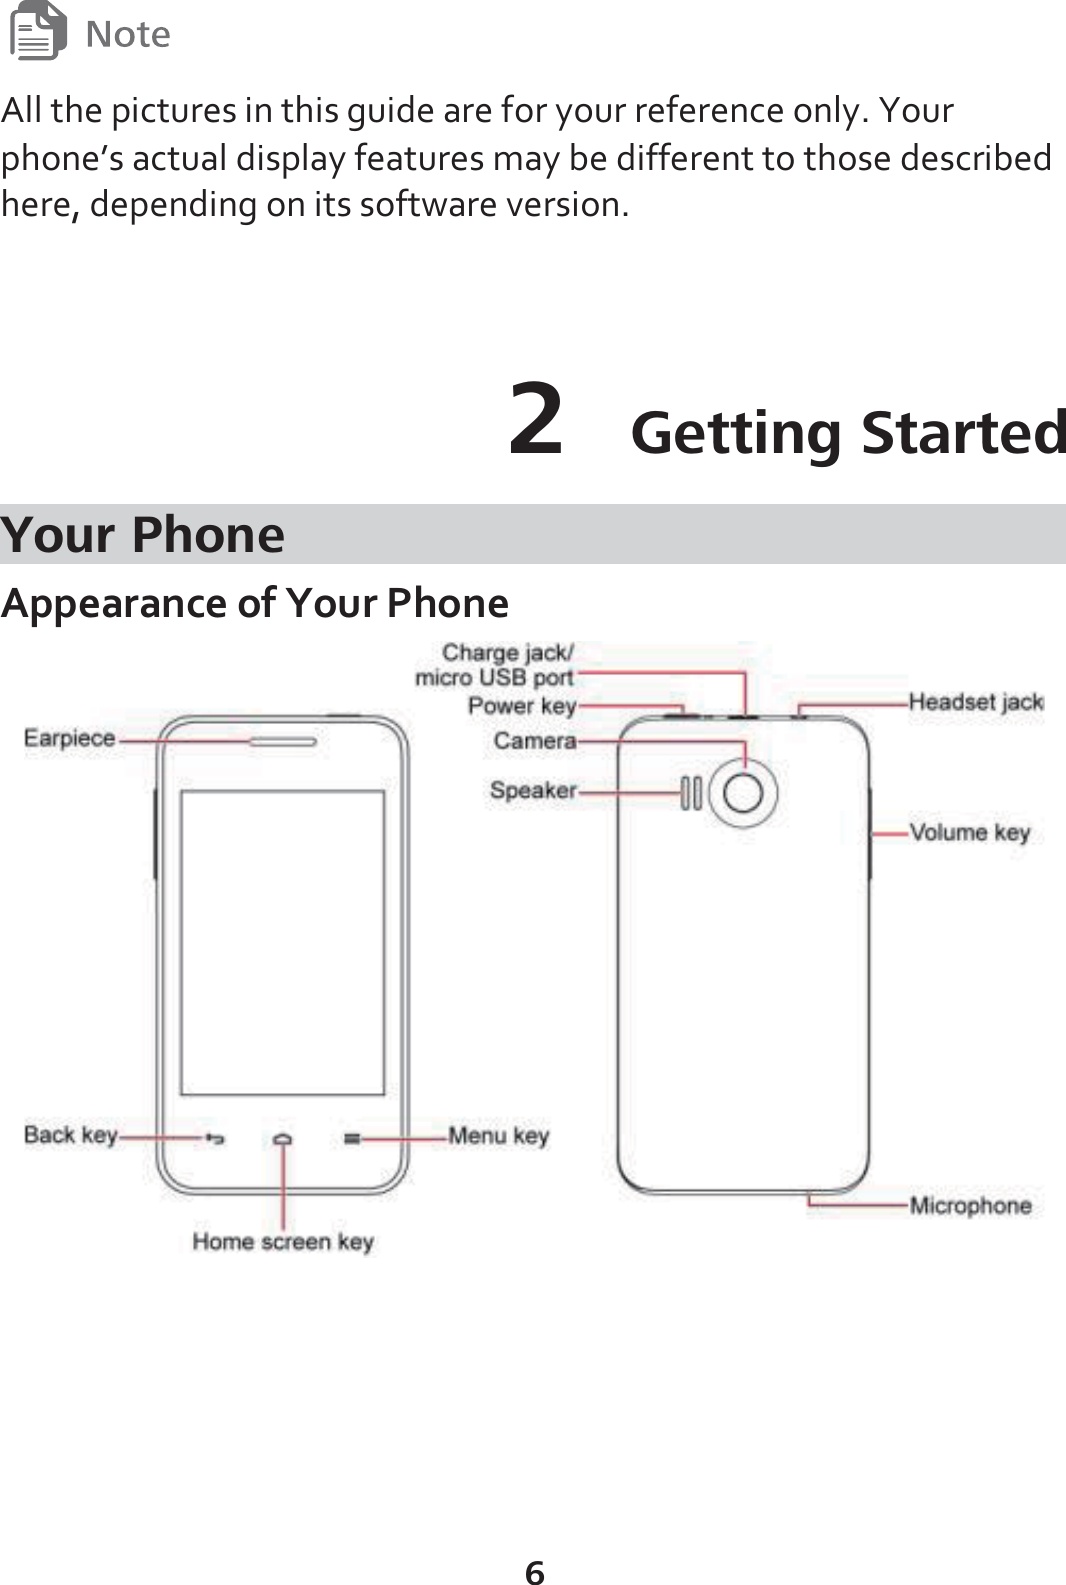 6  All the pictures in this guide are for your reference only. Your phone’s actual display features may be different to those described here, depending on its software version.    2  Getting Started Your Phone Appearance of Your Phone    